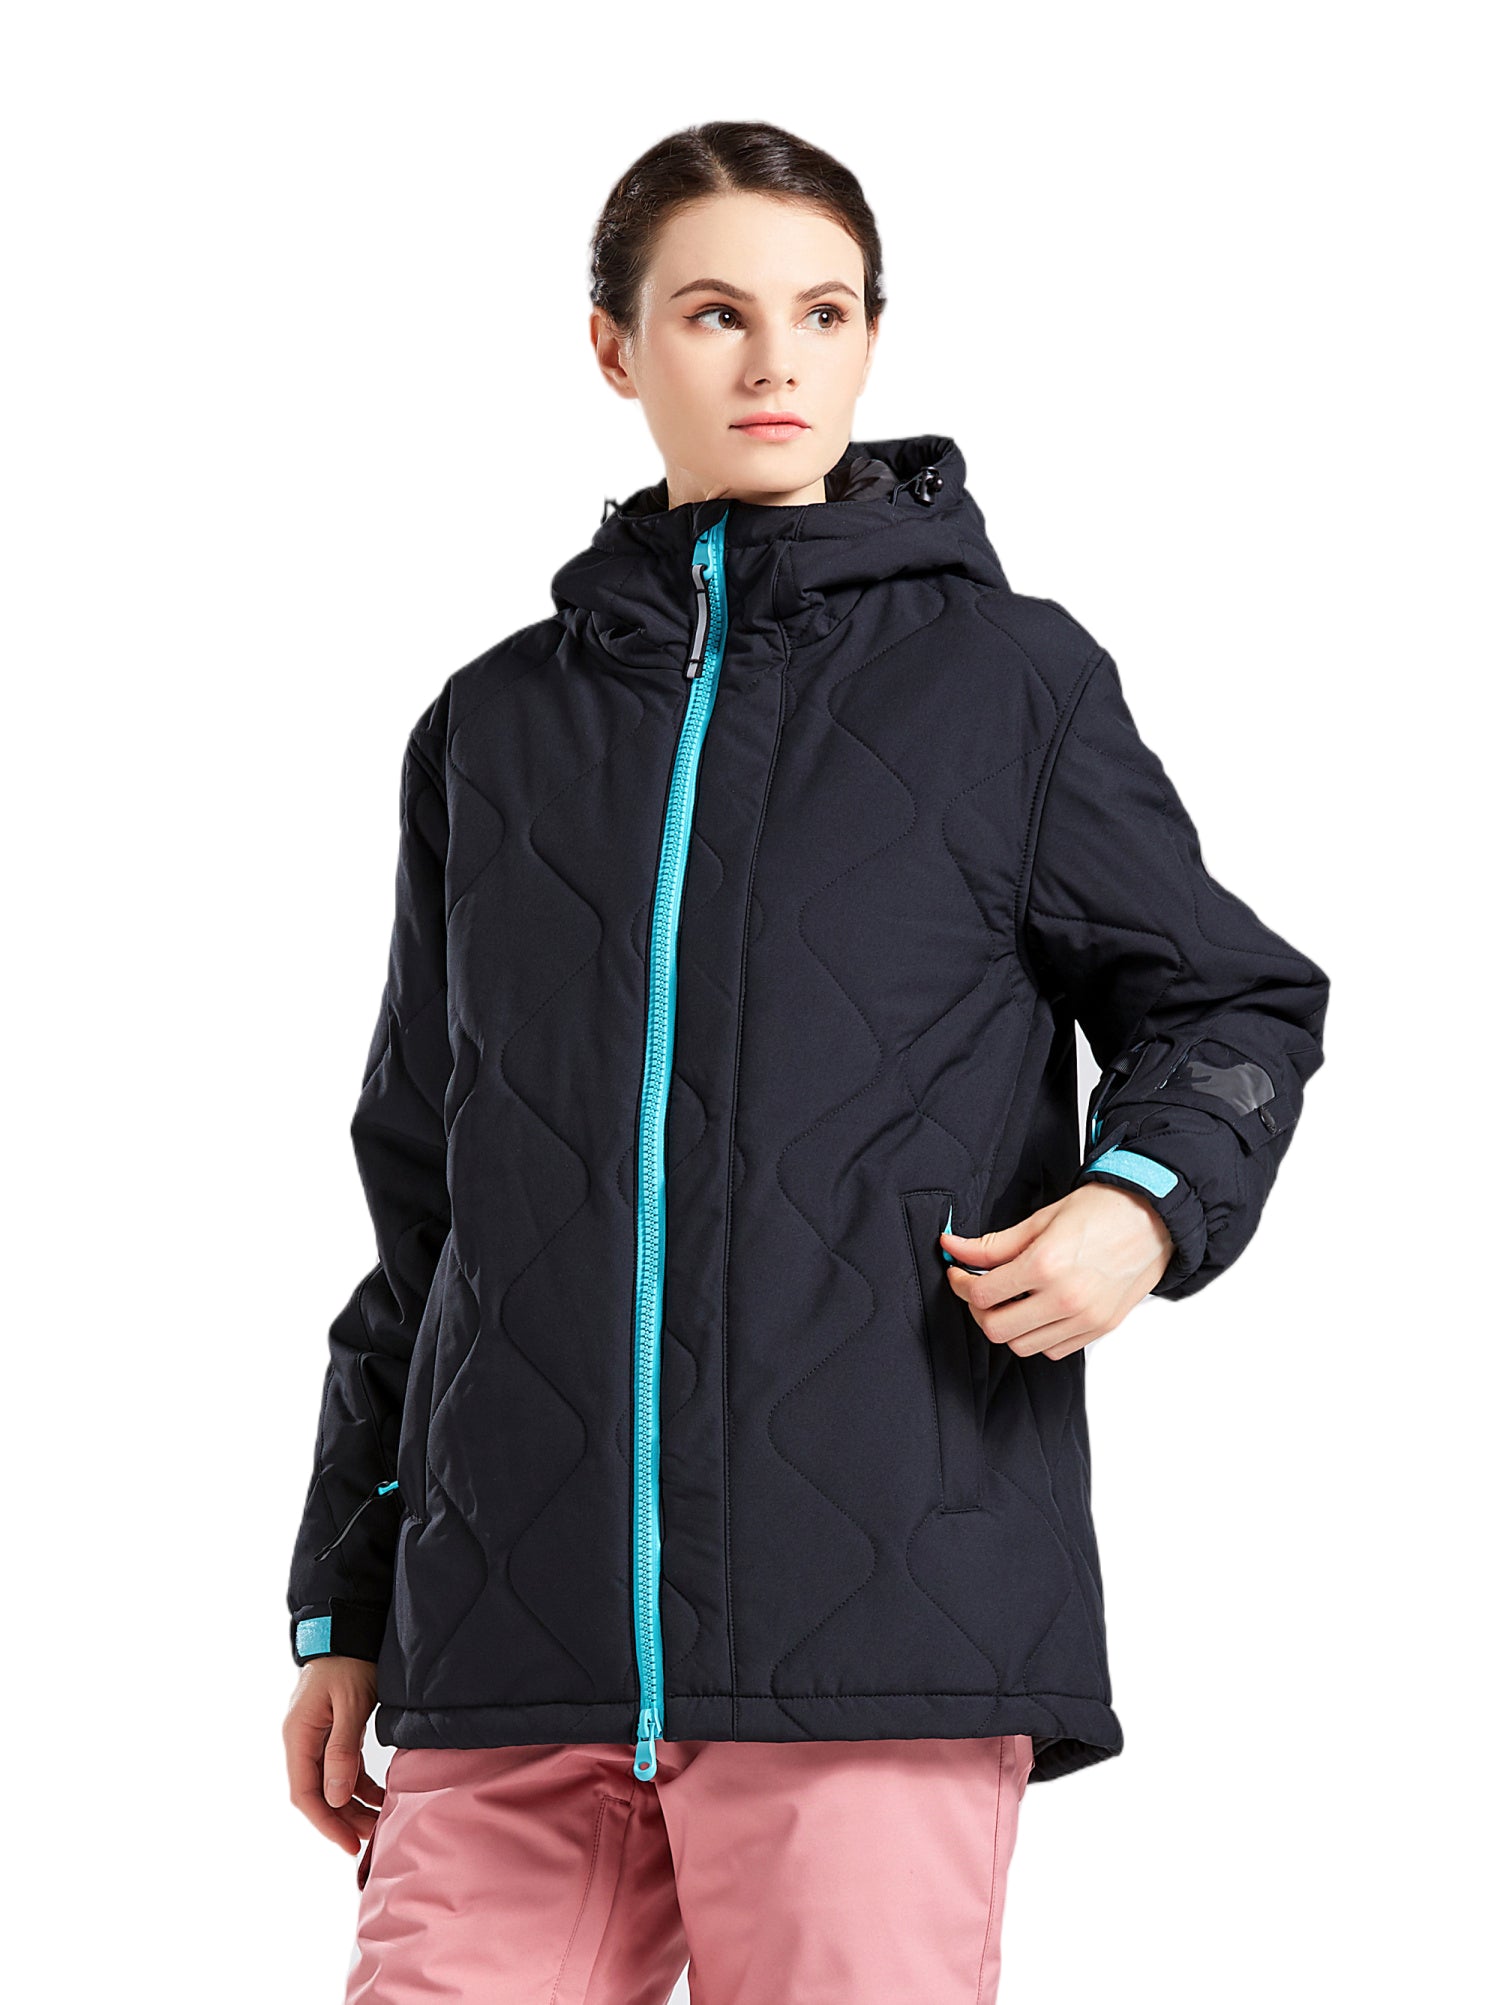 Bluemagic Womens Quilted Snow Jacket wide Baggy fit Loose